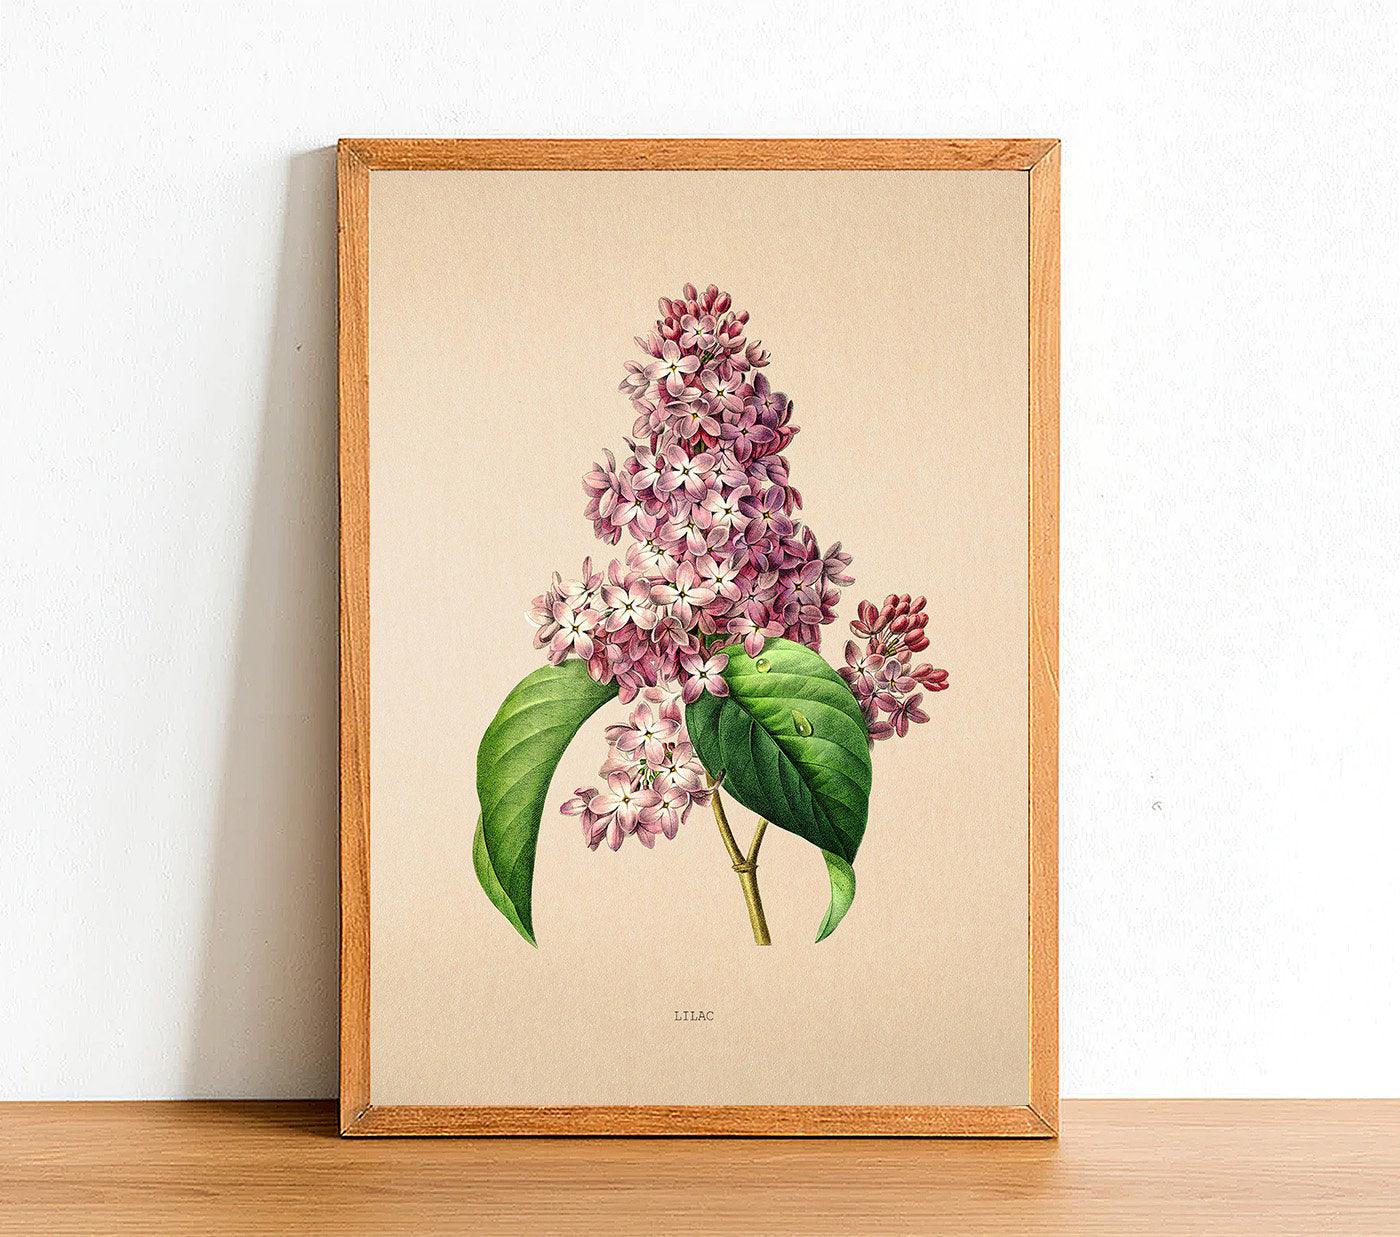 Lilac Flower Print - Vintage Flower Poster - Classic Posters